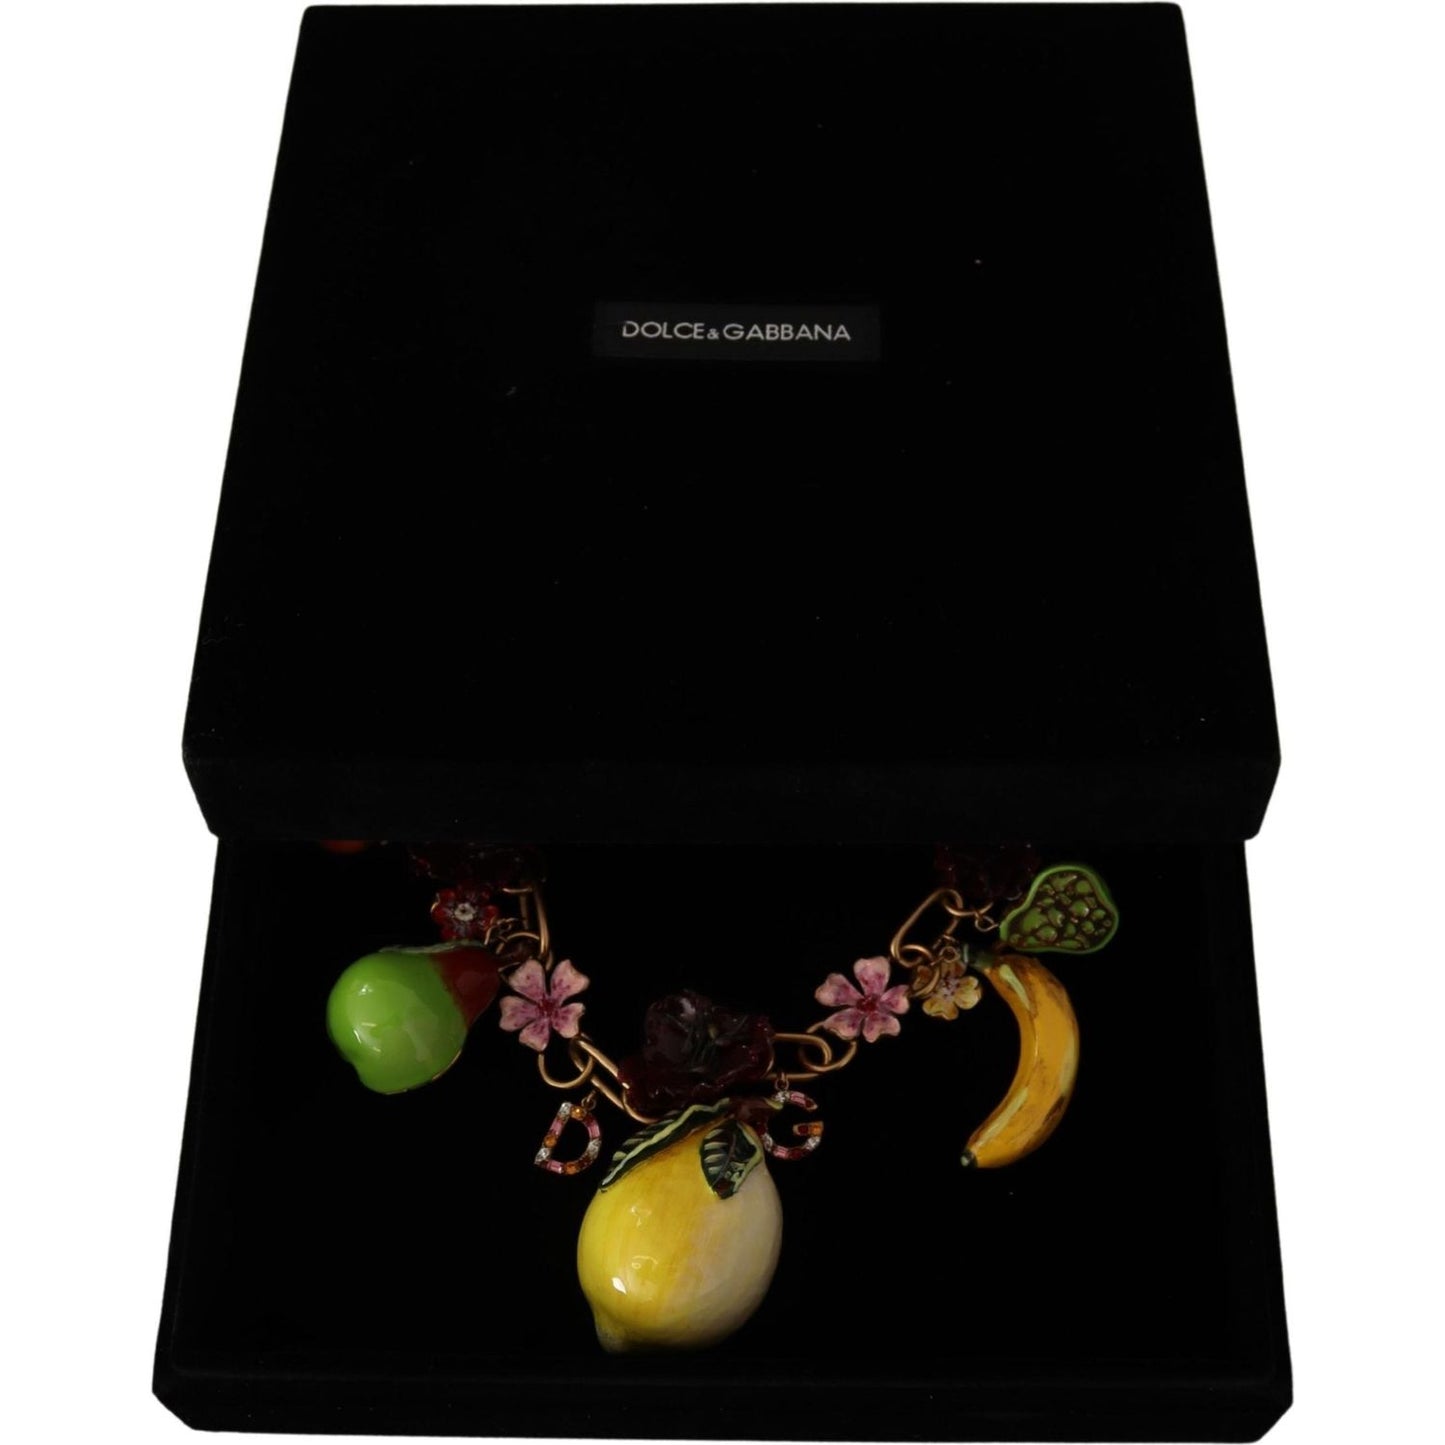 Dolce & Gabbana Chic Gold Statement Sicily Fruit Necklace gold-brass-sicily-fruits-roses-statement-necklace WOMAN NECKLACE IMG_1920-scaled-99bf04f0-ec8.jpg